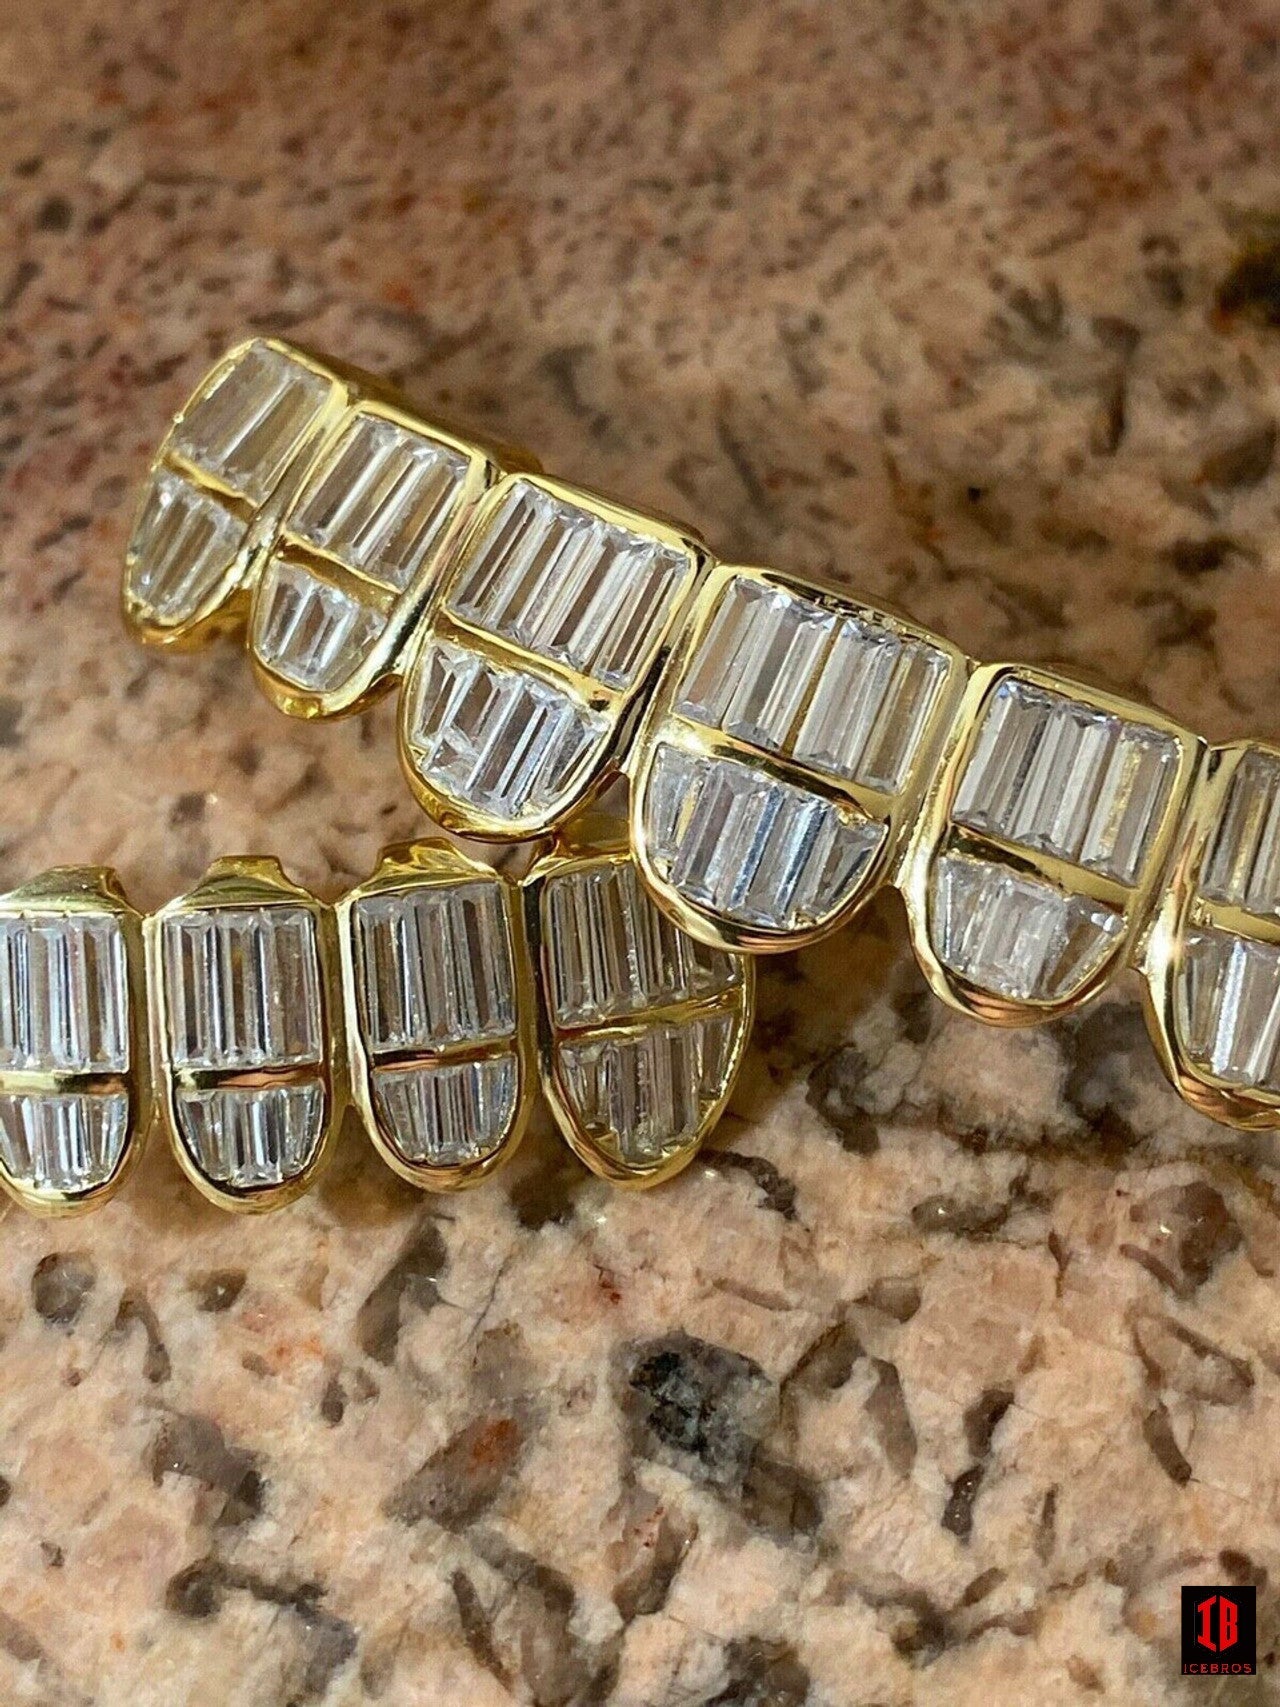 25 Silver White Gold Filled Baguette Diamond GRILLZ Teeth All Grills